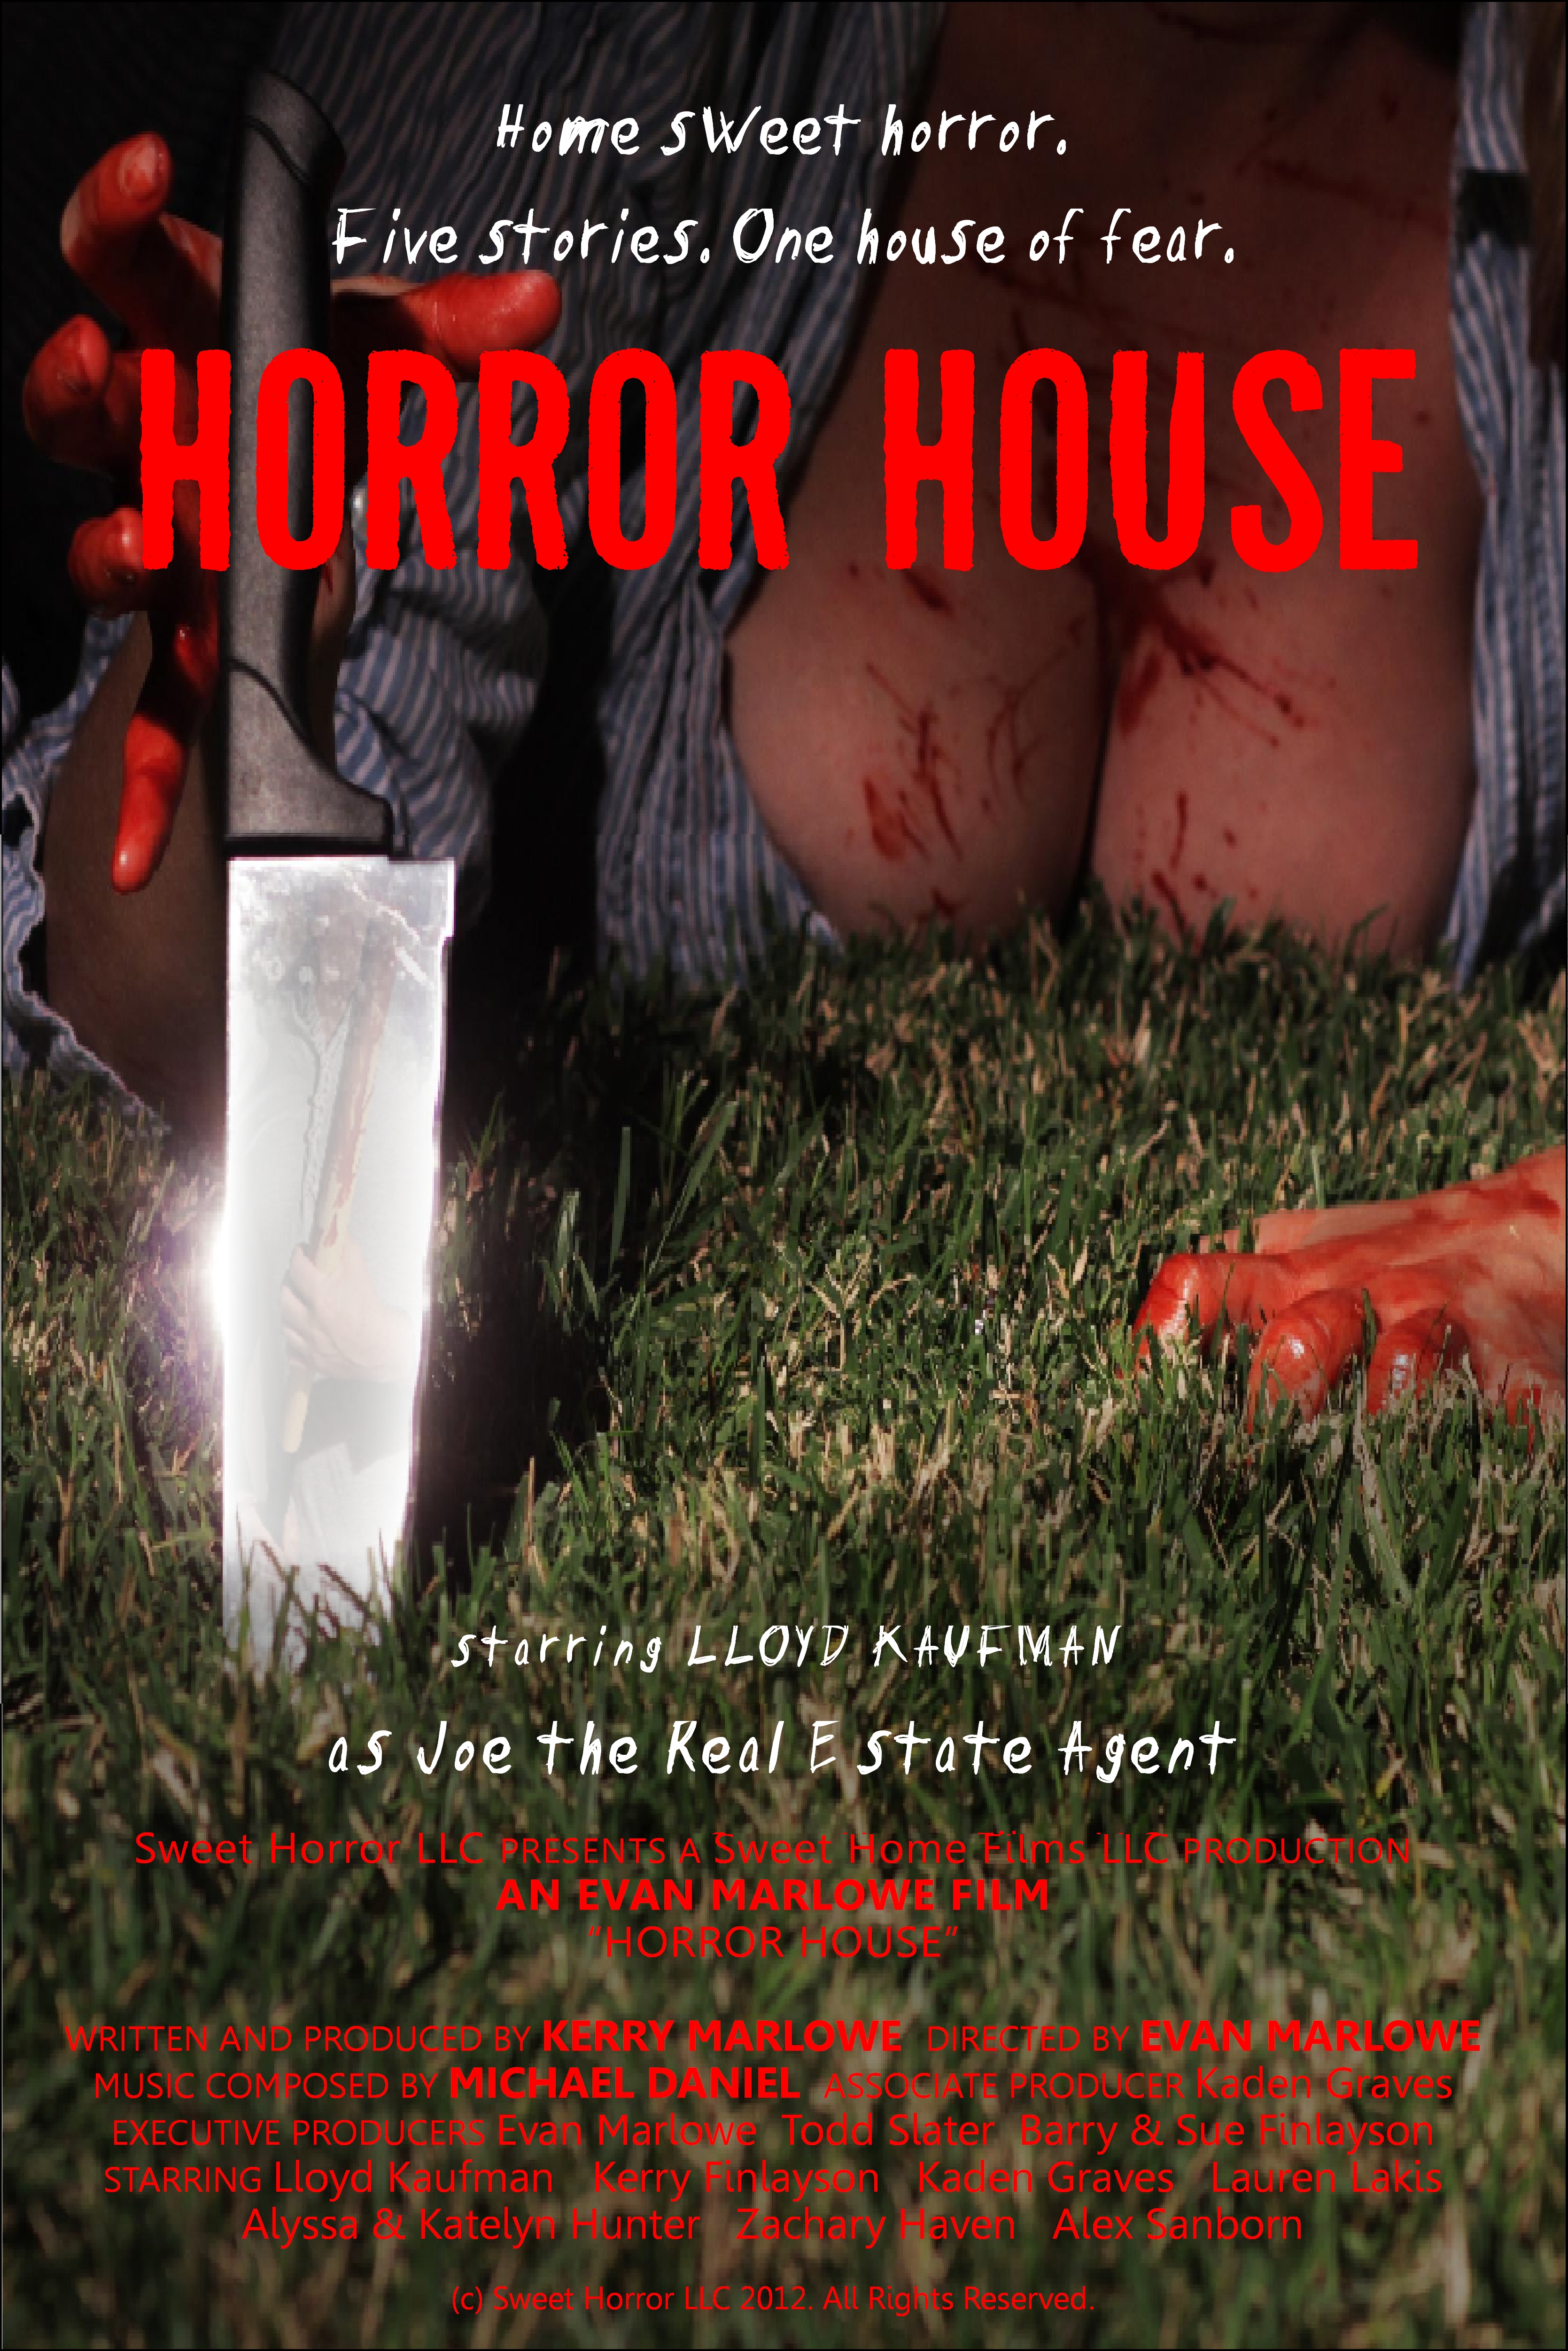 The poster for Horror House.